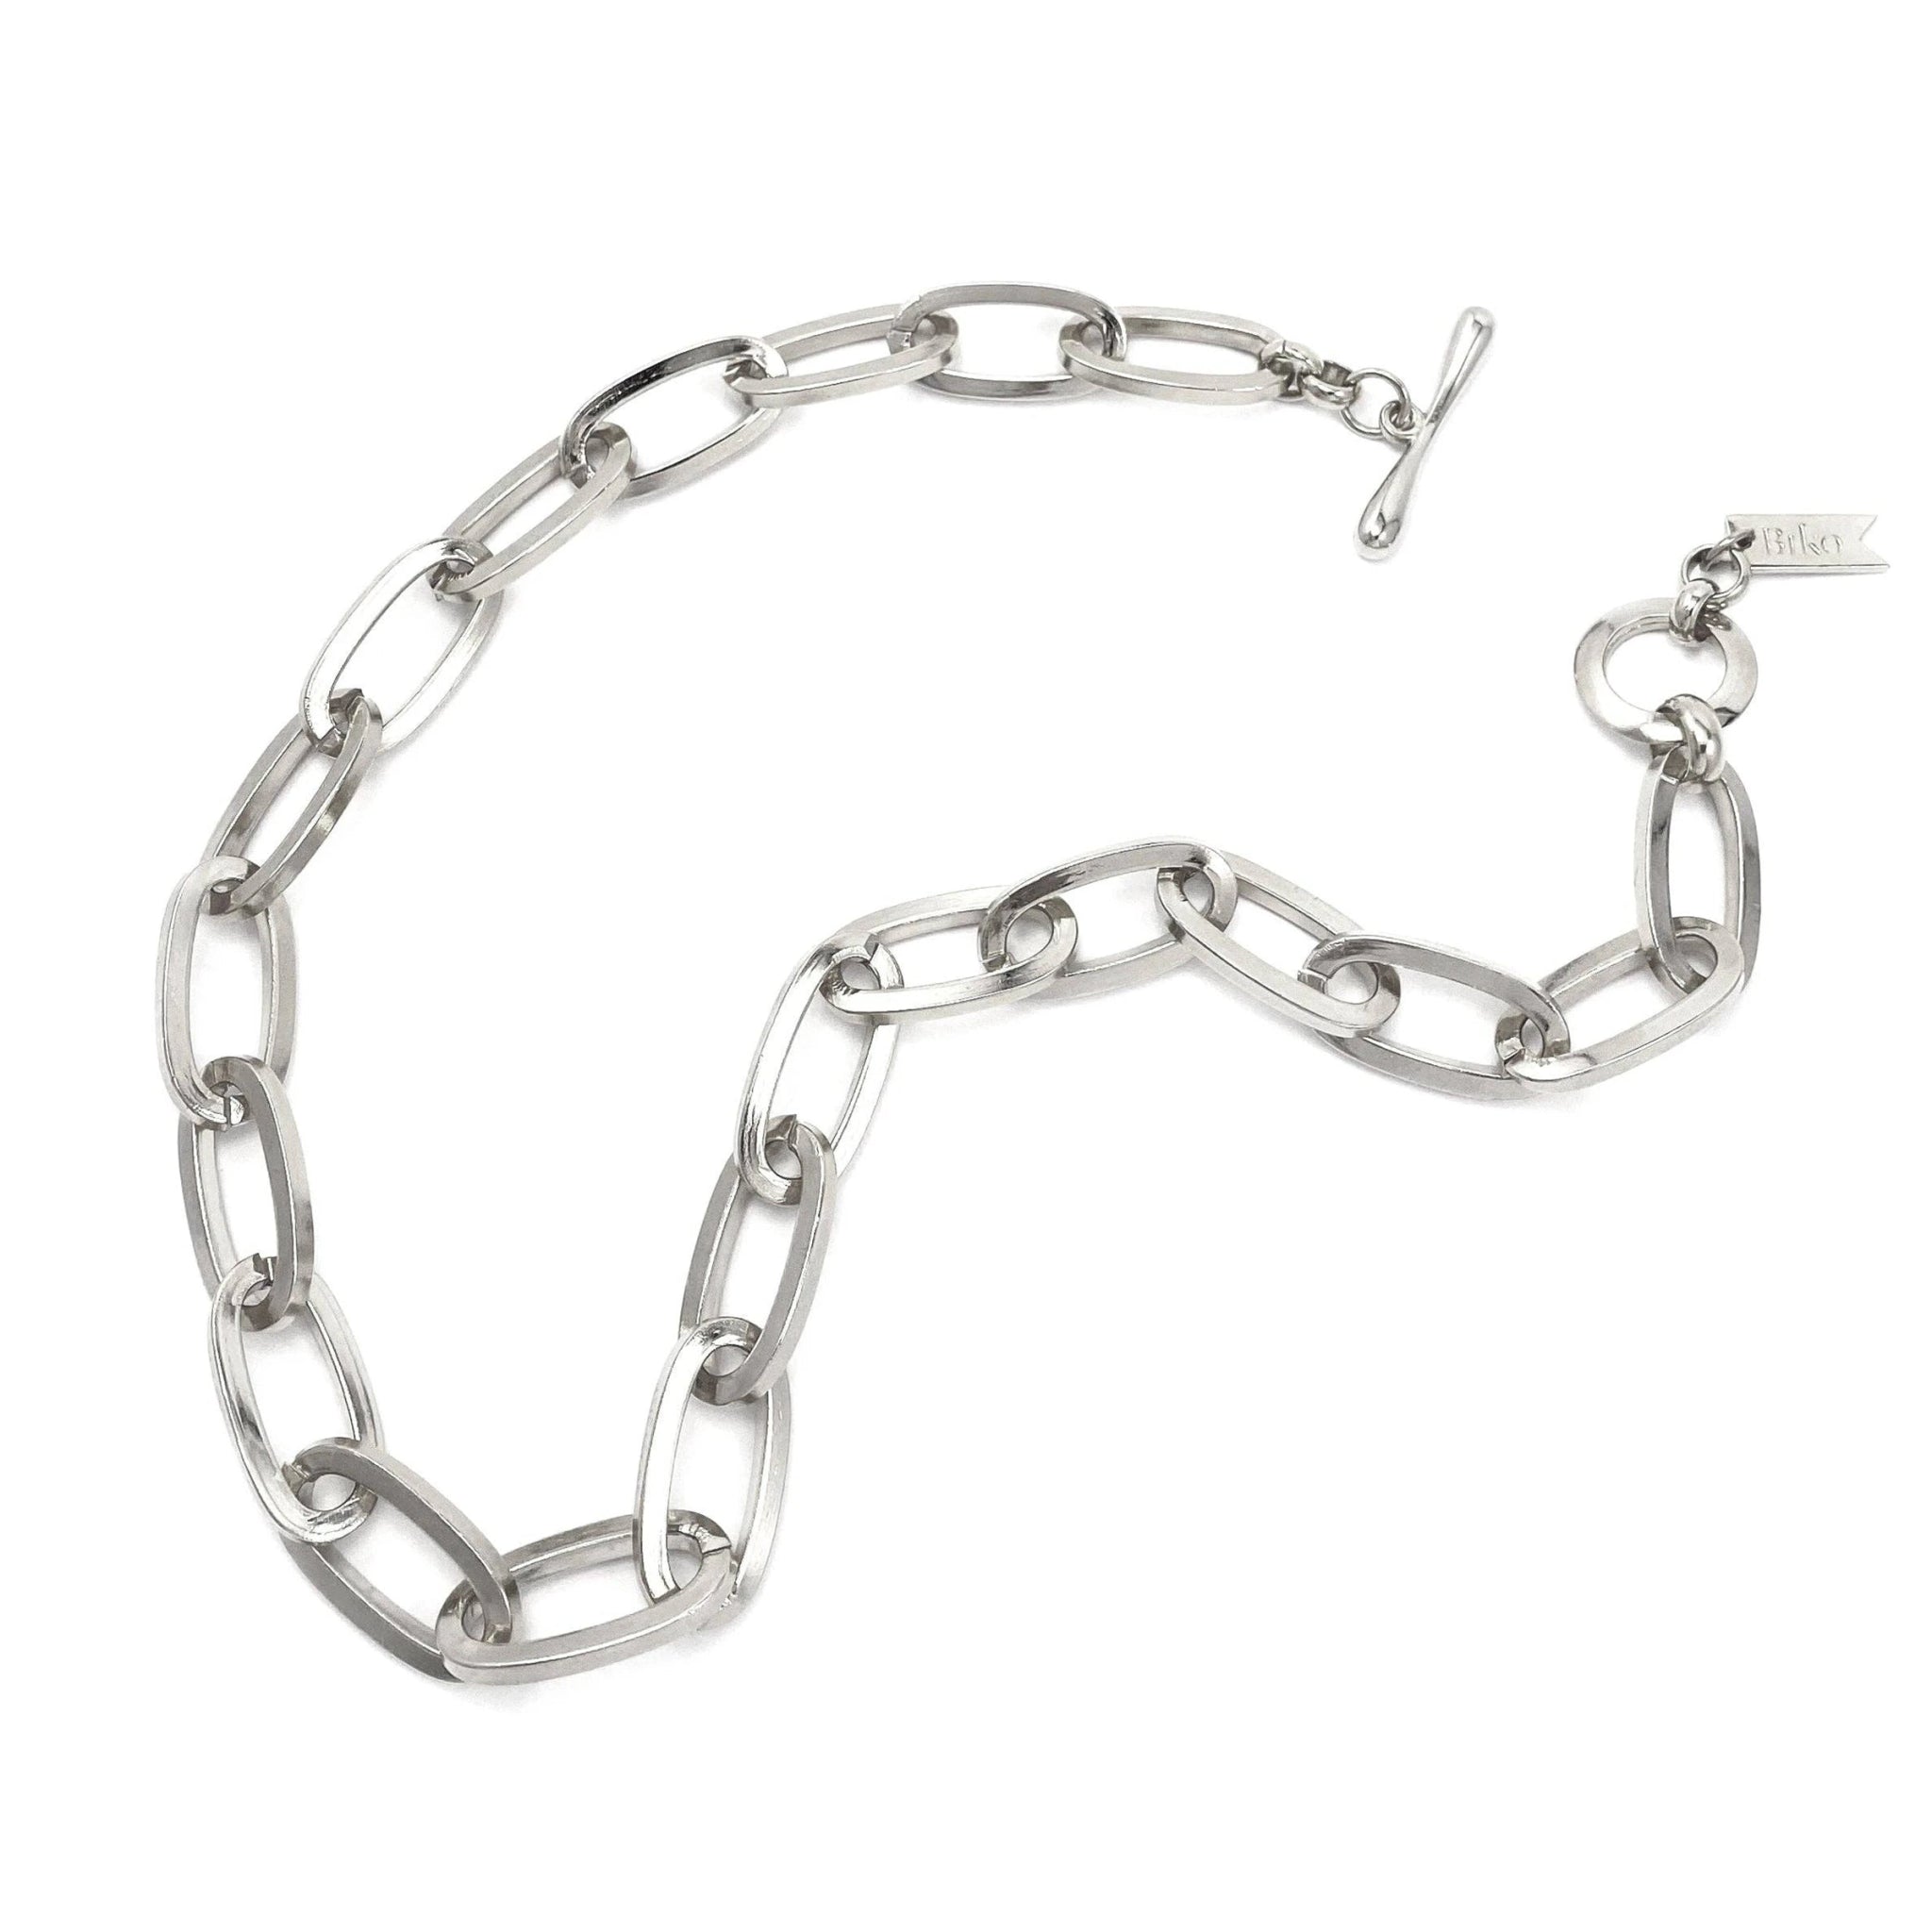 Essential Chainlink Silver Collar Necklace - L'Atelier Global